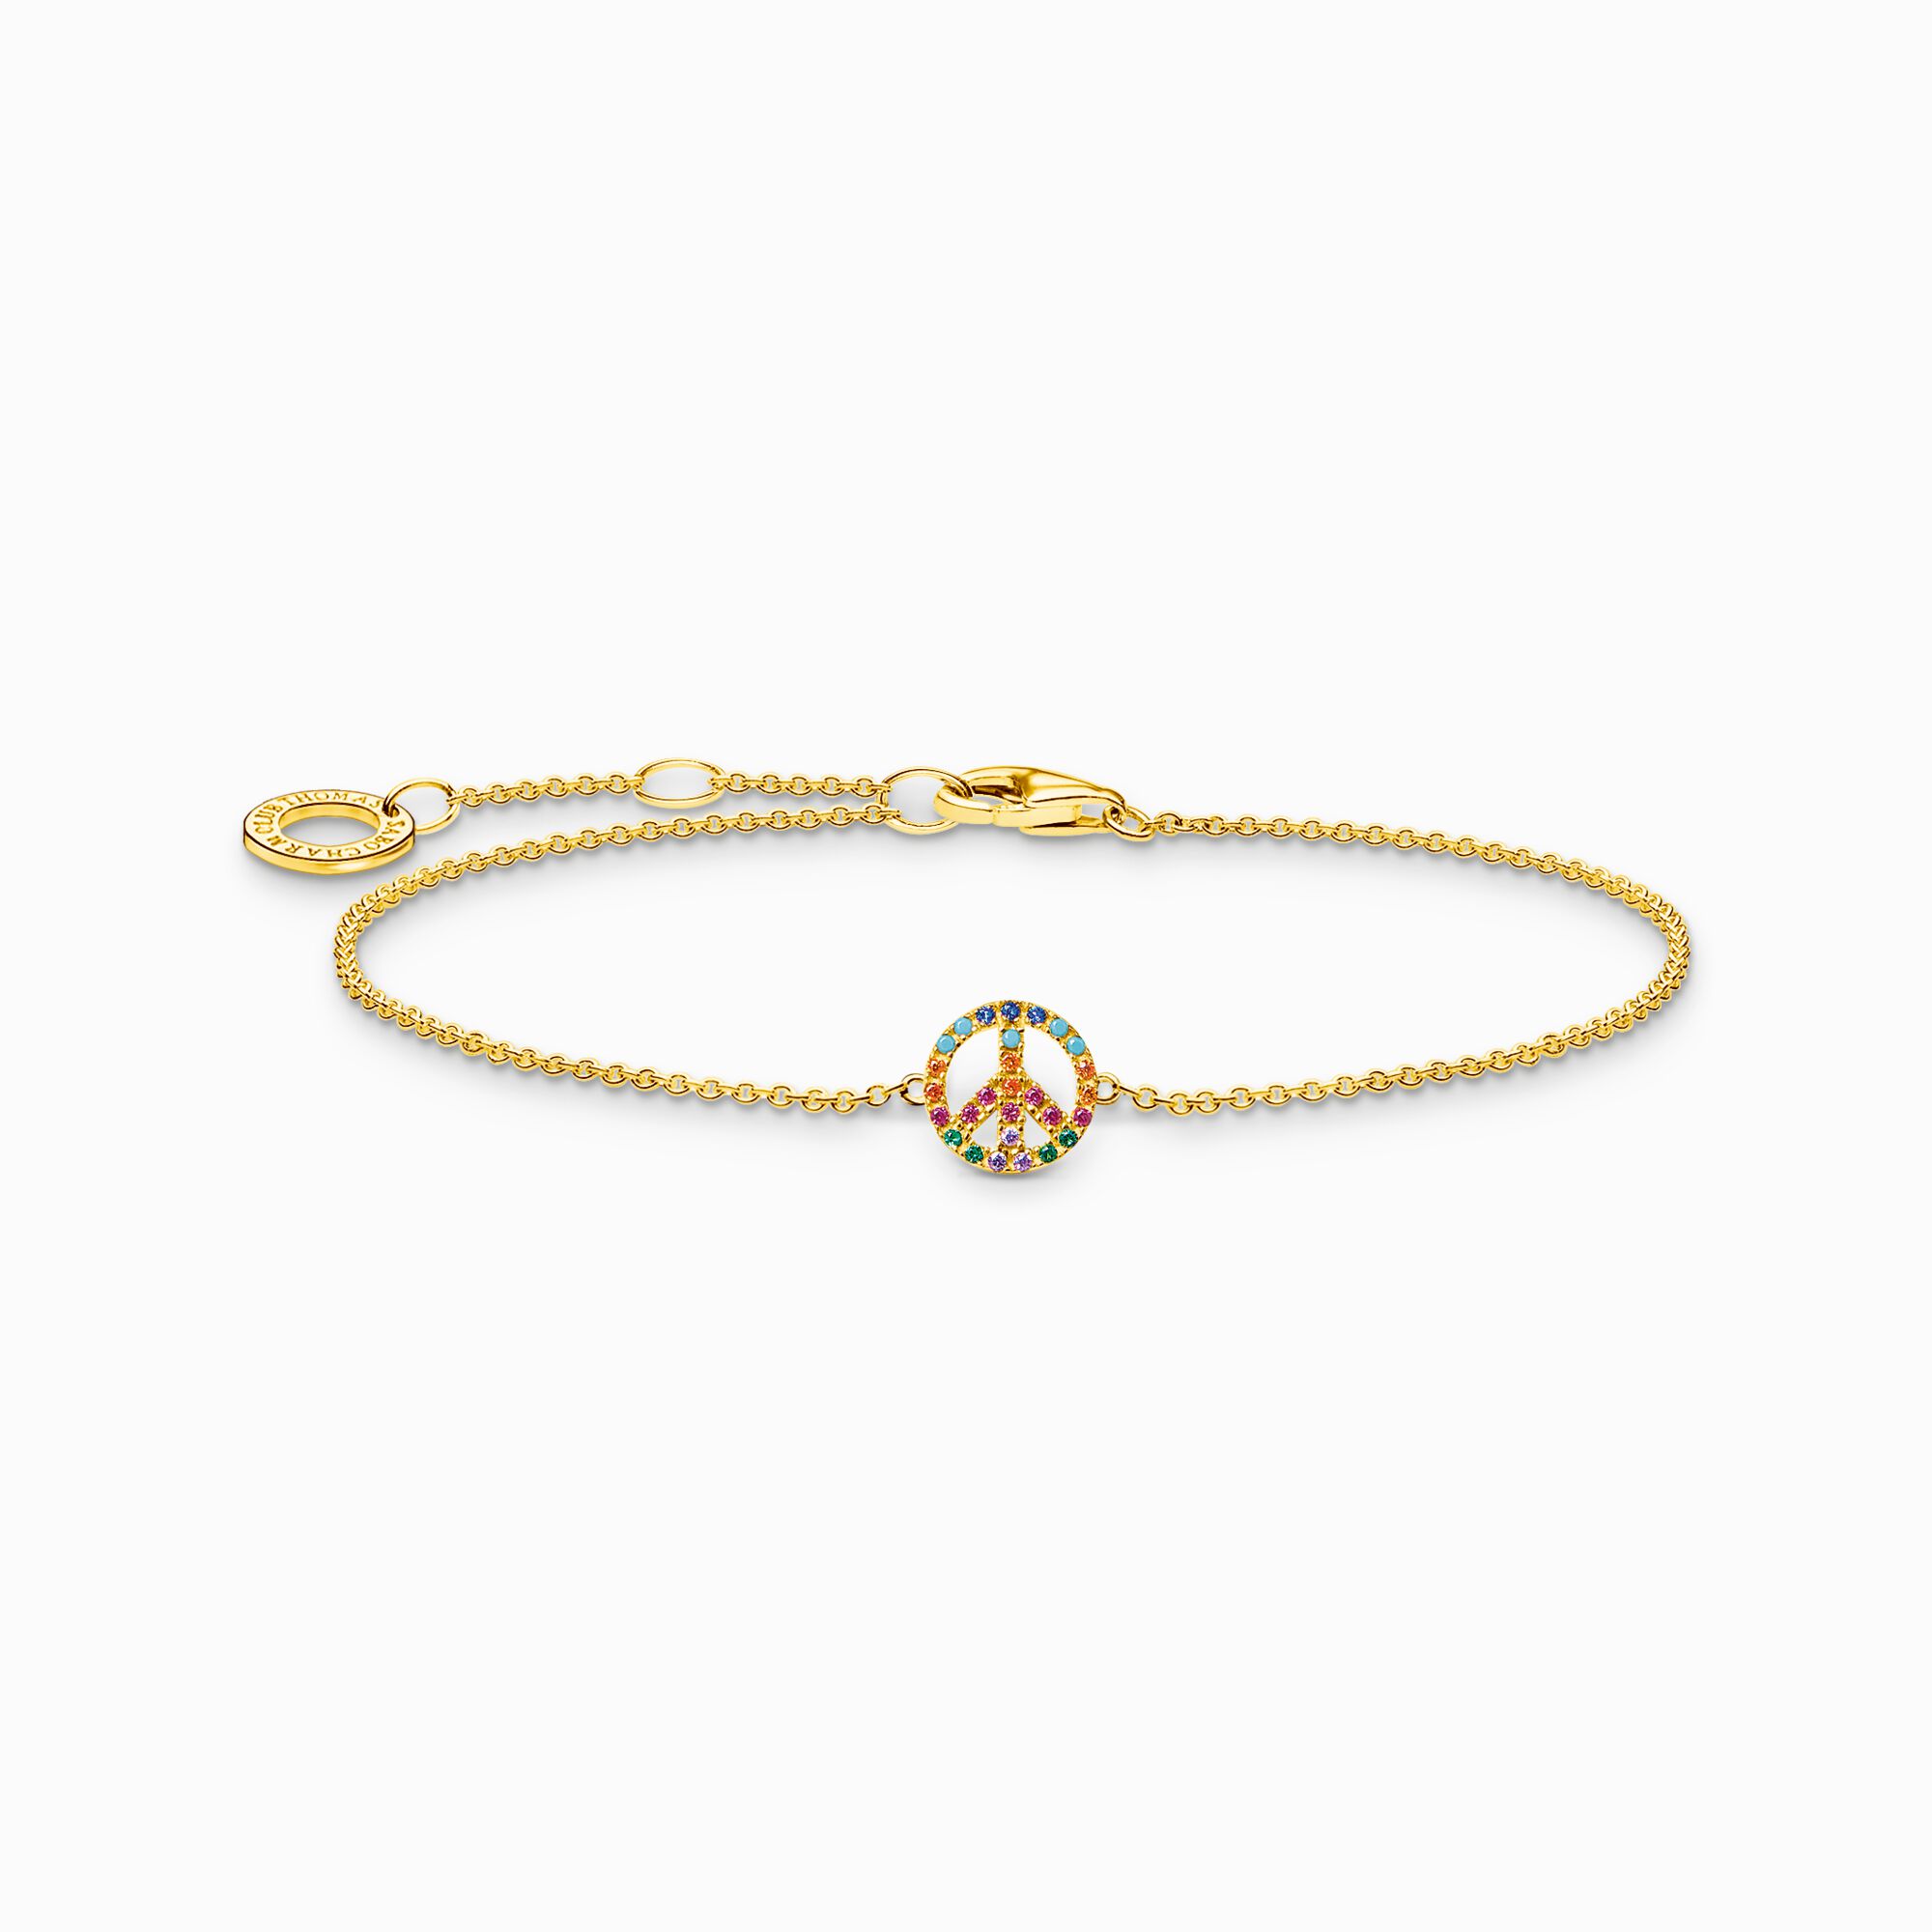 Bracelet peace with colourful stones gold from the Charming Collection collection in the THOMAS SABO online store